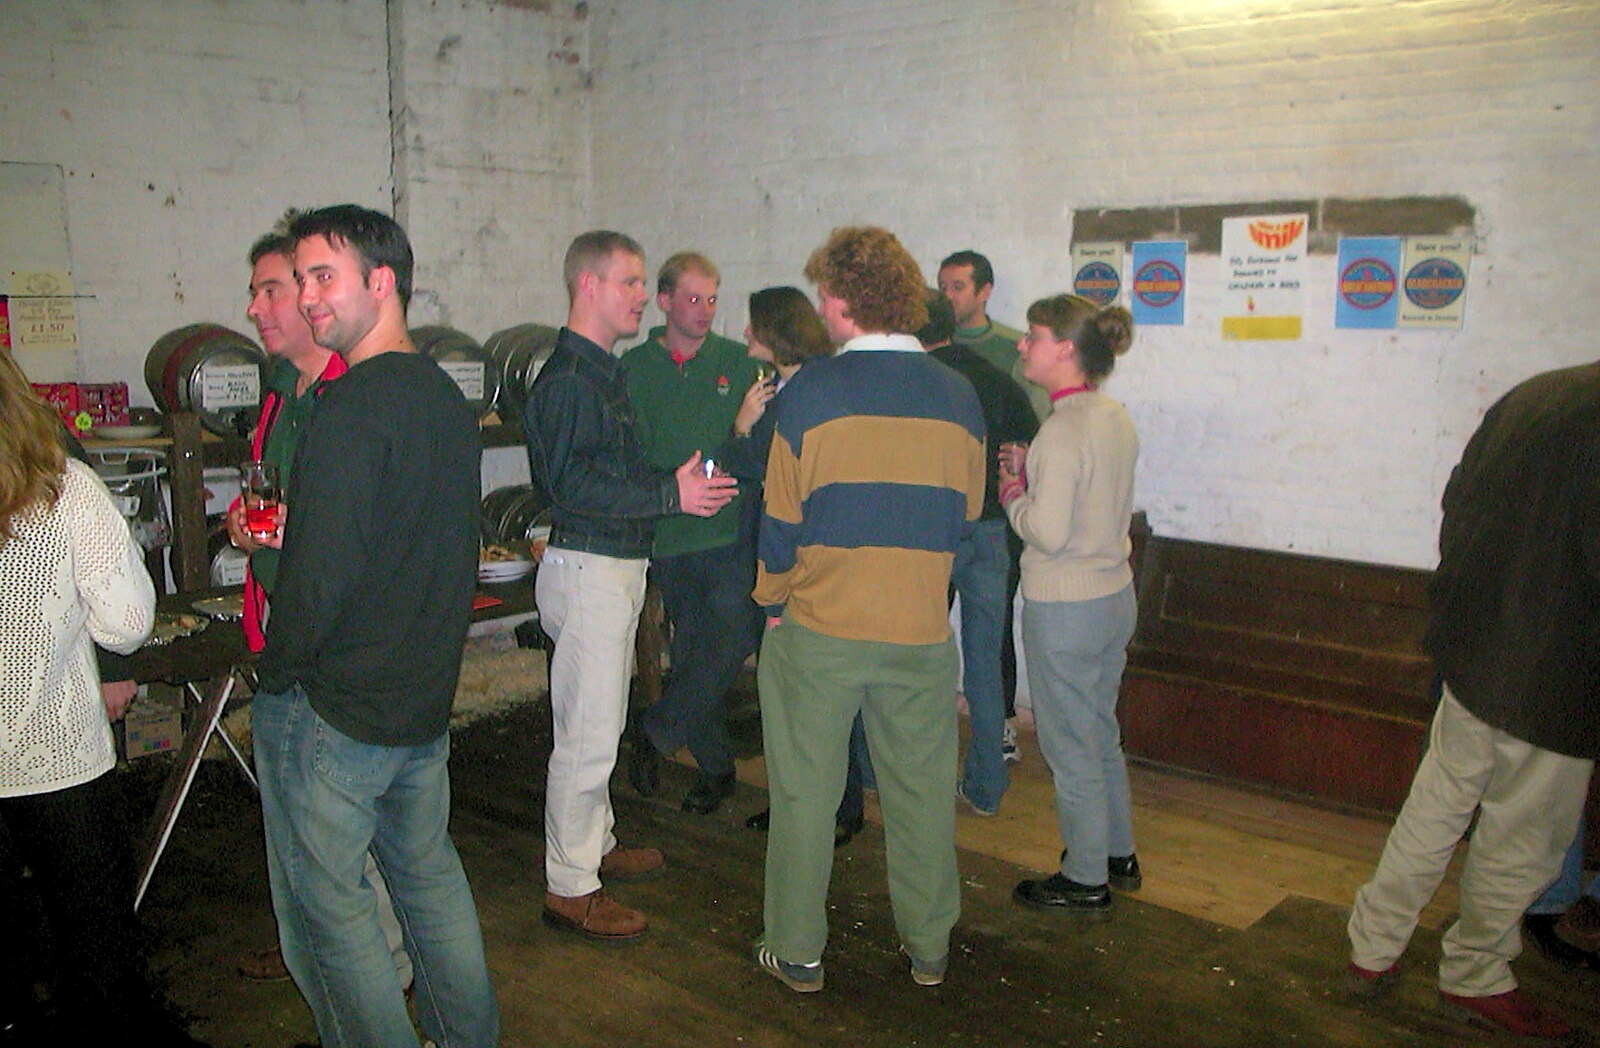 People in the Swan's outbuilding from The Hoxne Beer Festival, Suffolk - 20th May 2002